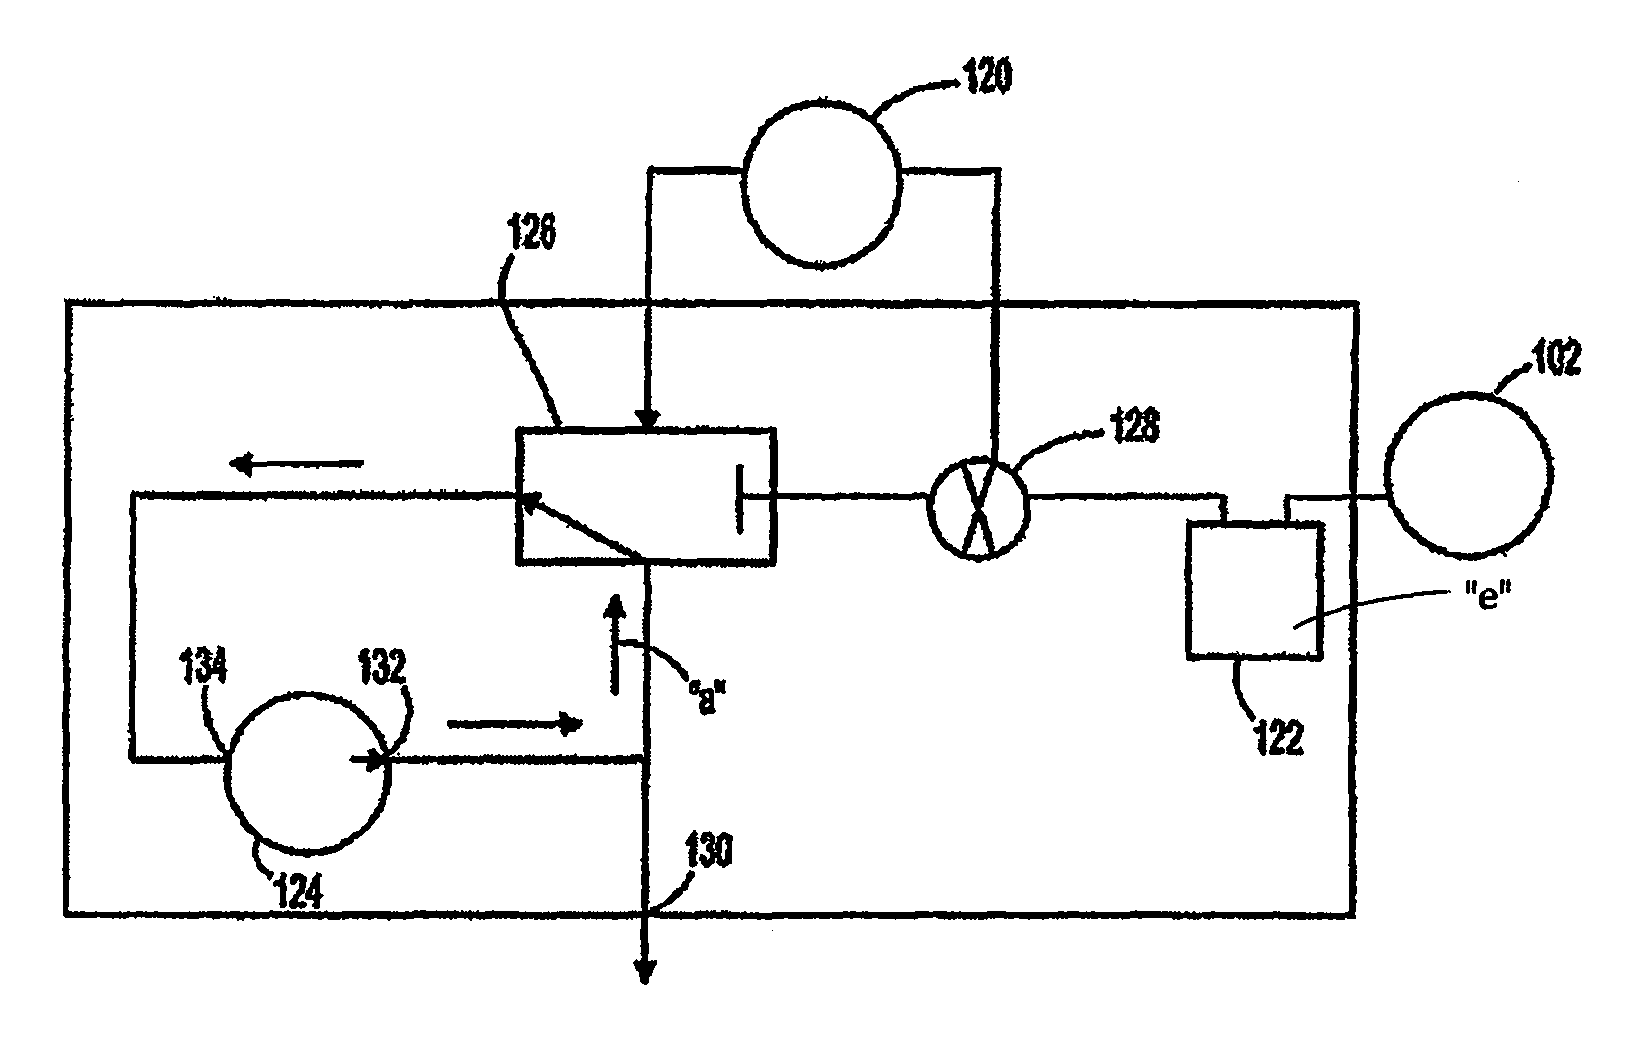 Wound therapy system with proportional valve mechanism